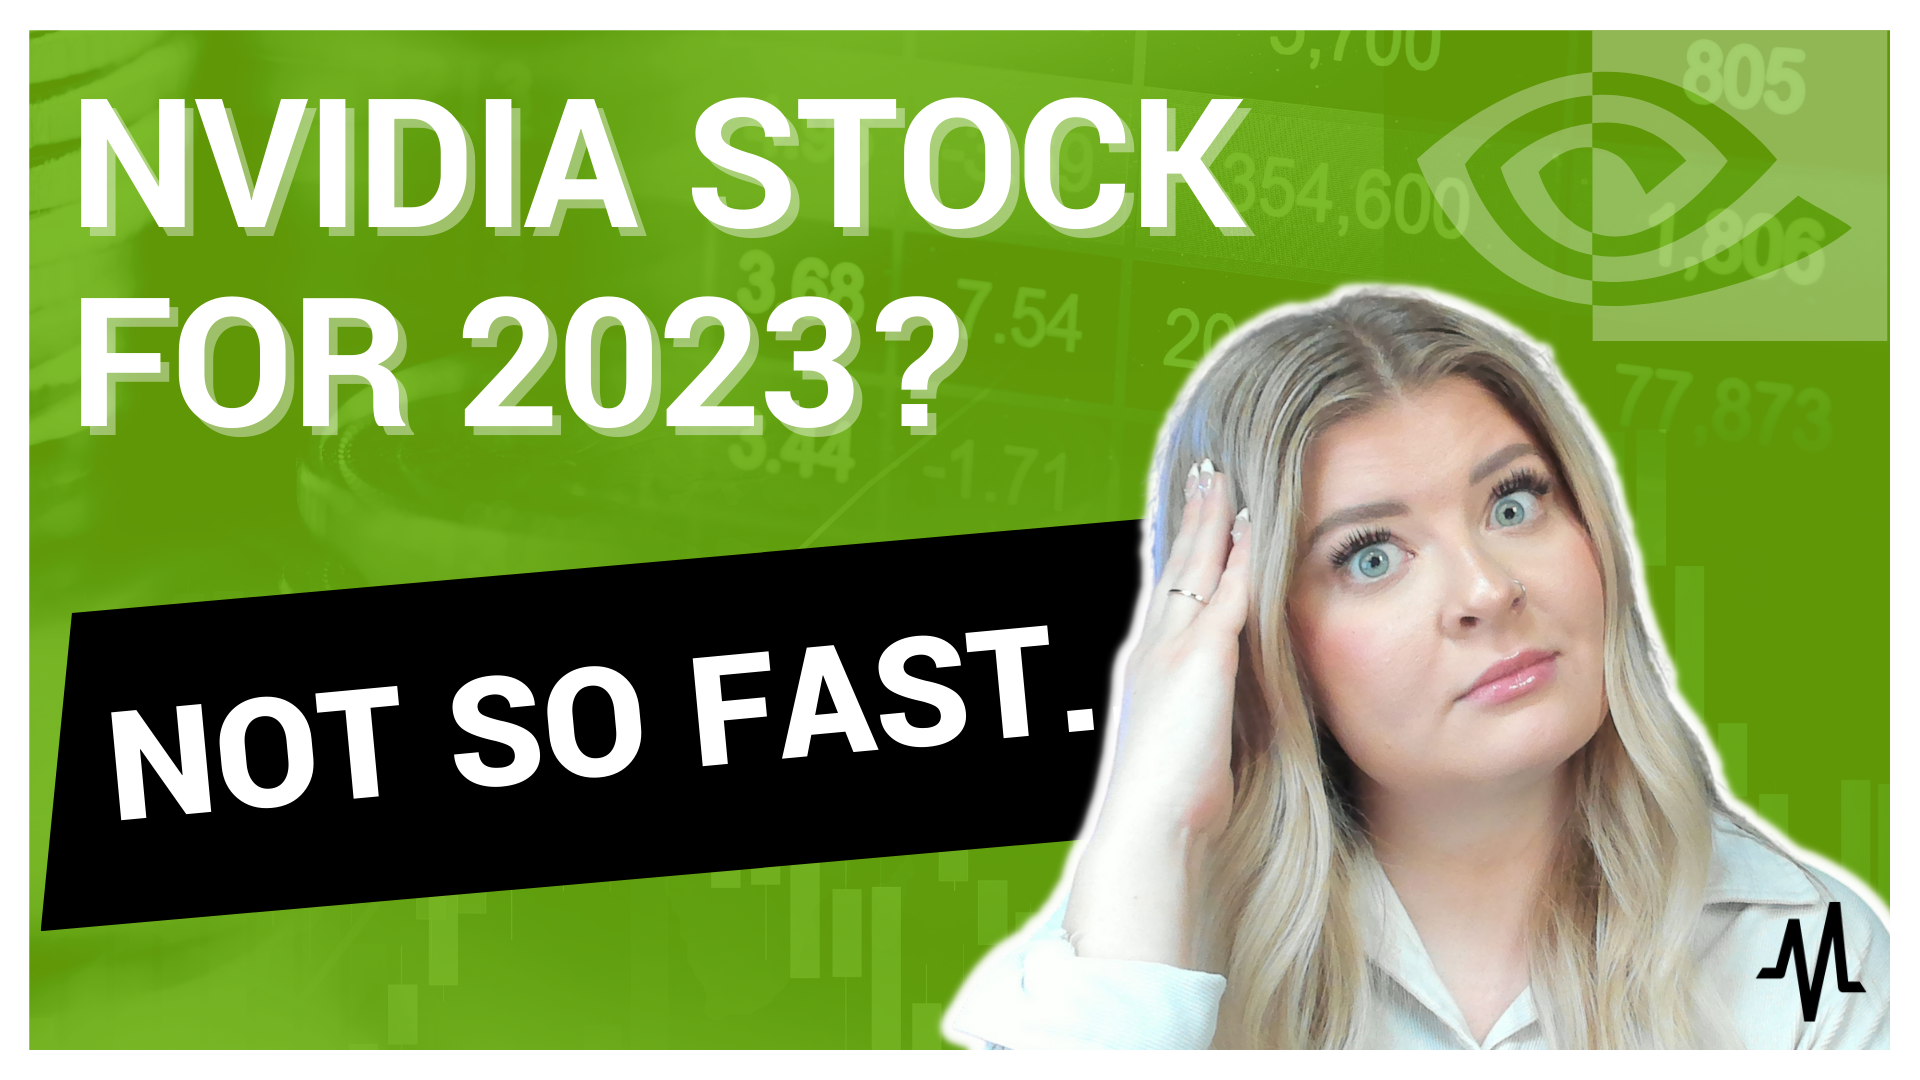 Nvidia Stock For 2023? Not So Fast.